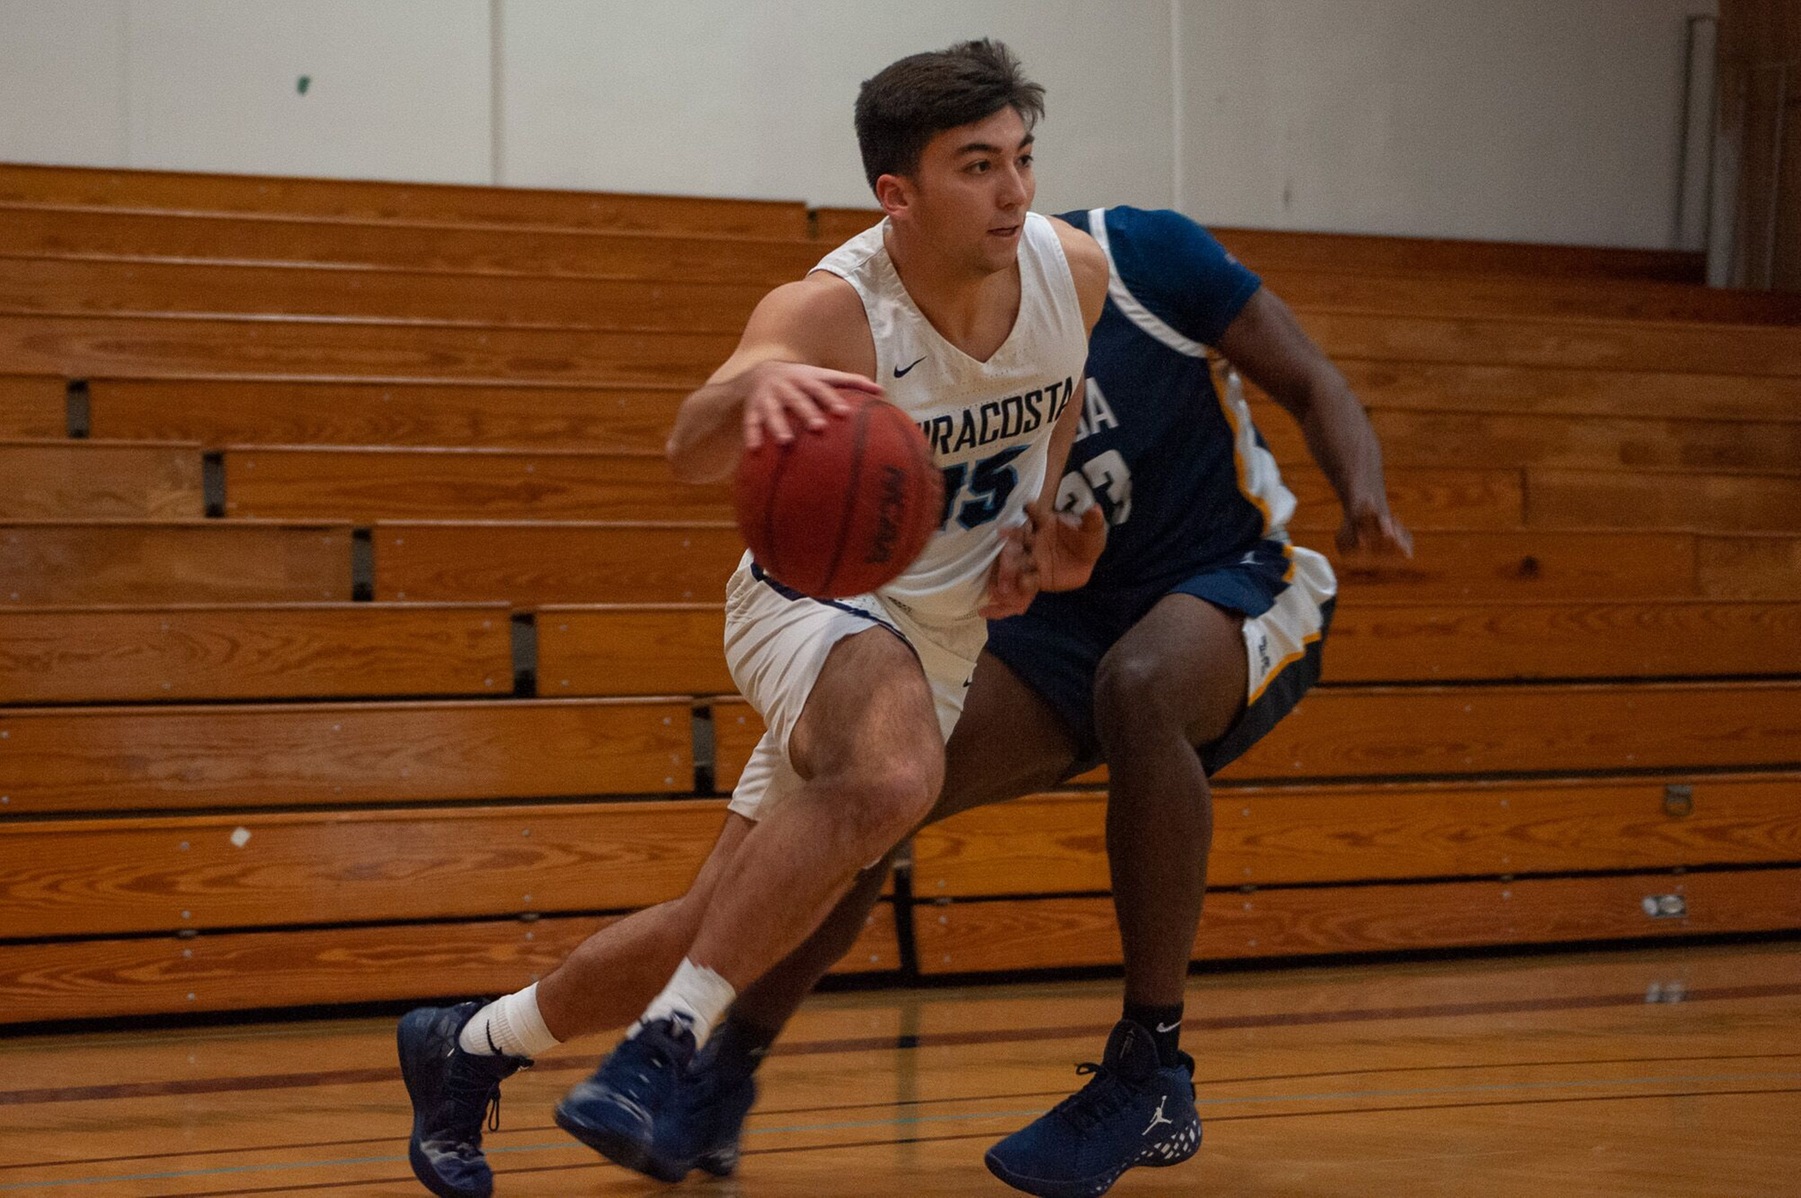 Men's basketball player dribbles towards the basket in a game.